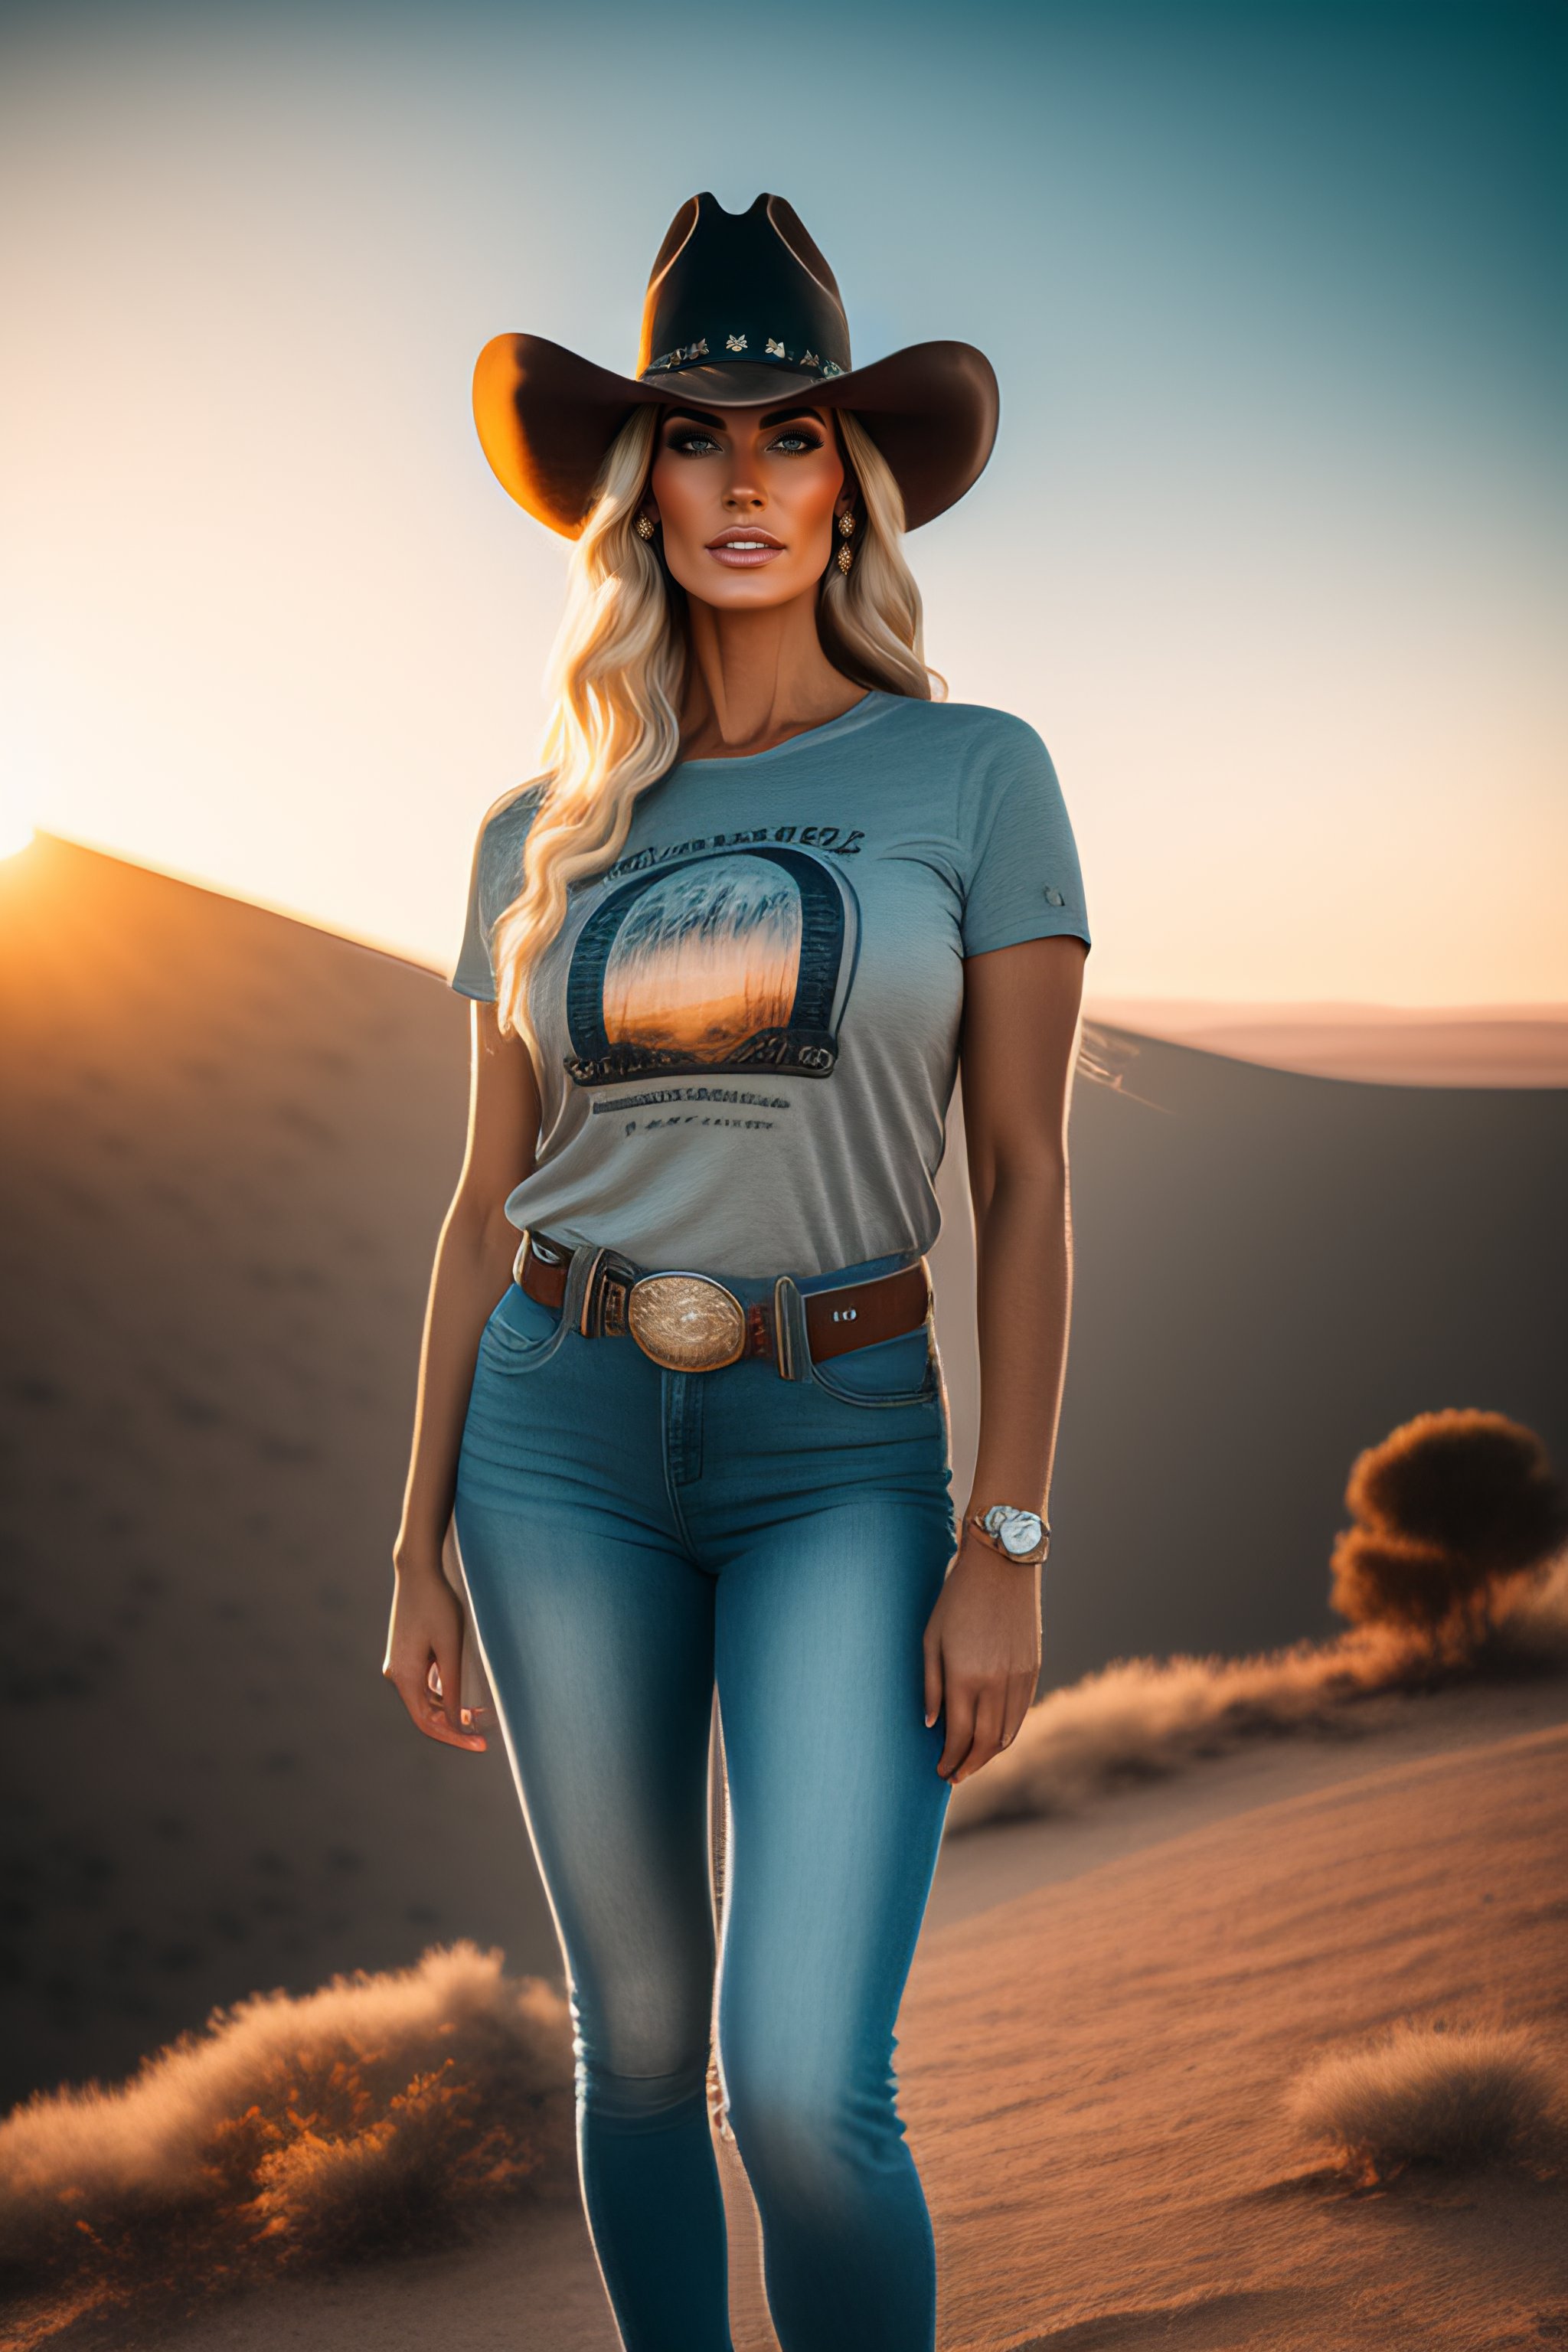 Stylish Woman with Cowboy Hat and Accessories Stock Image - Image of trunk,  outside: 59125667